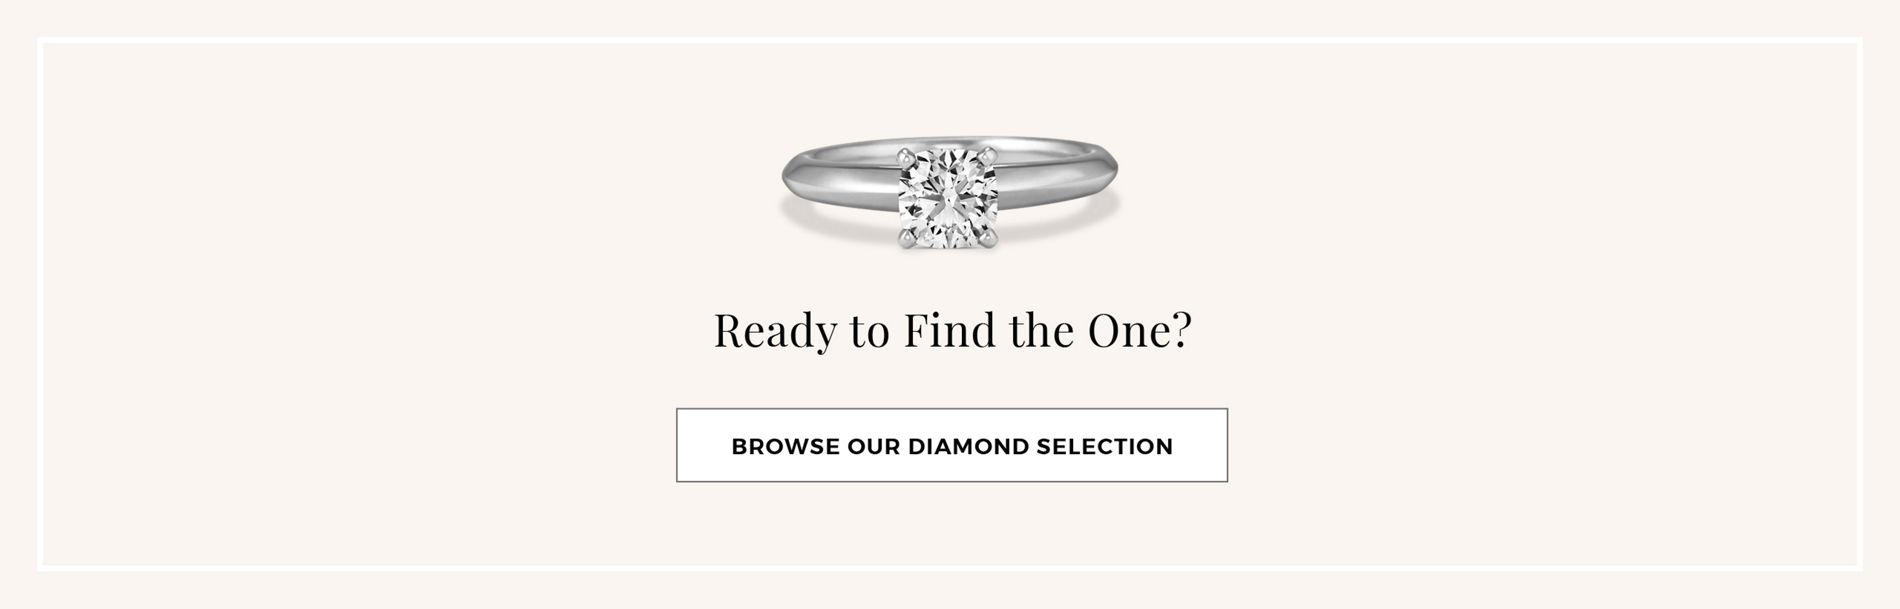 Ready to find the one? Shop Diamonds.